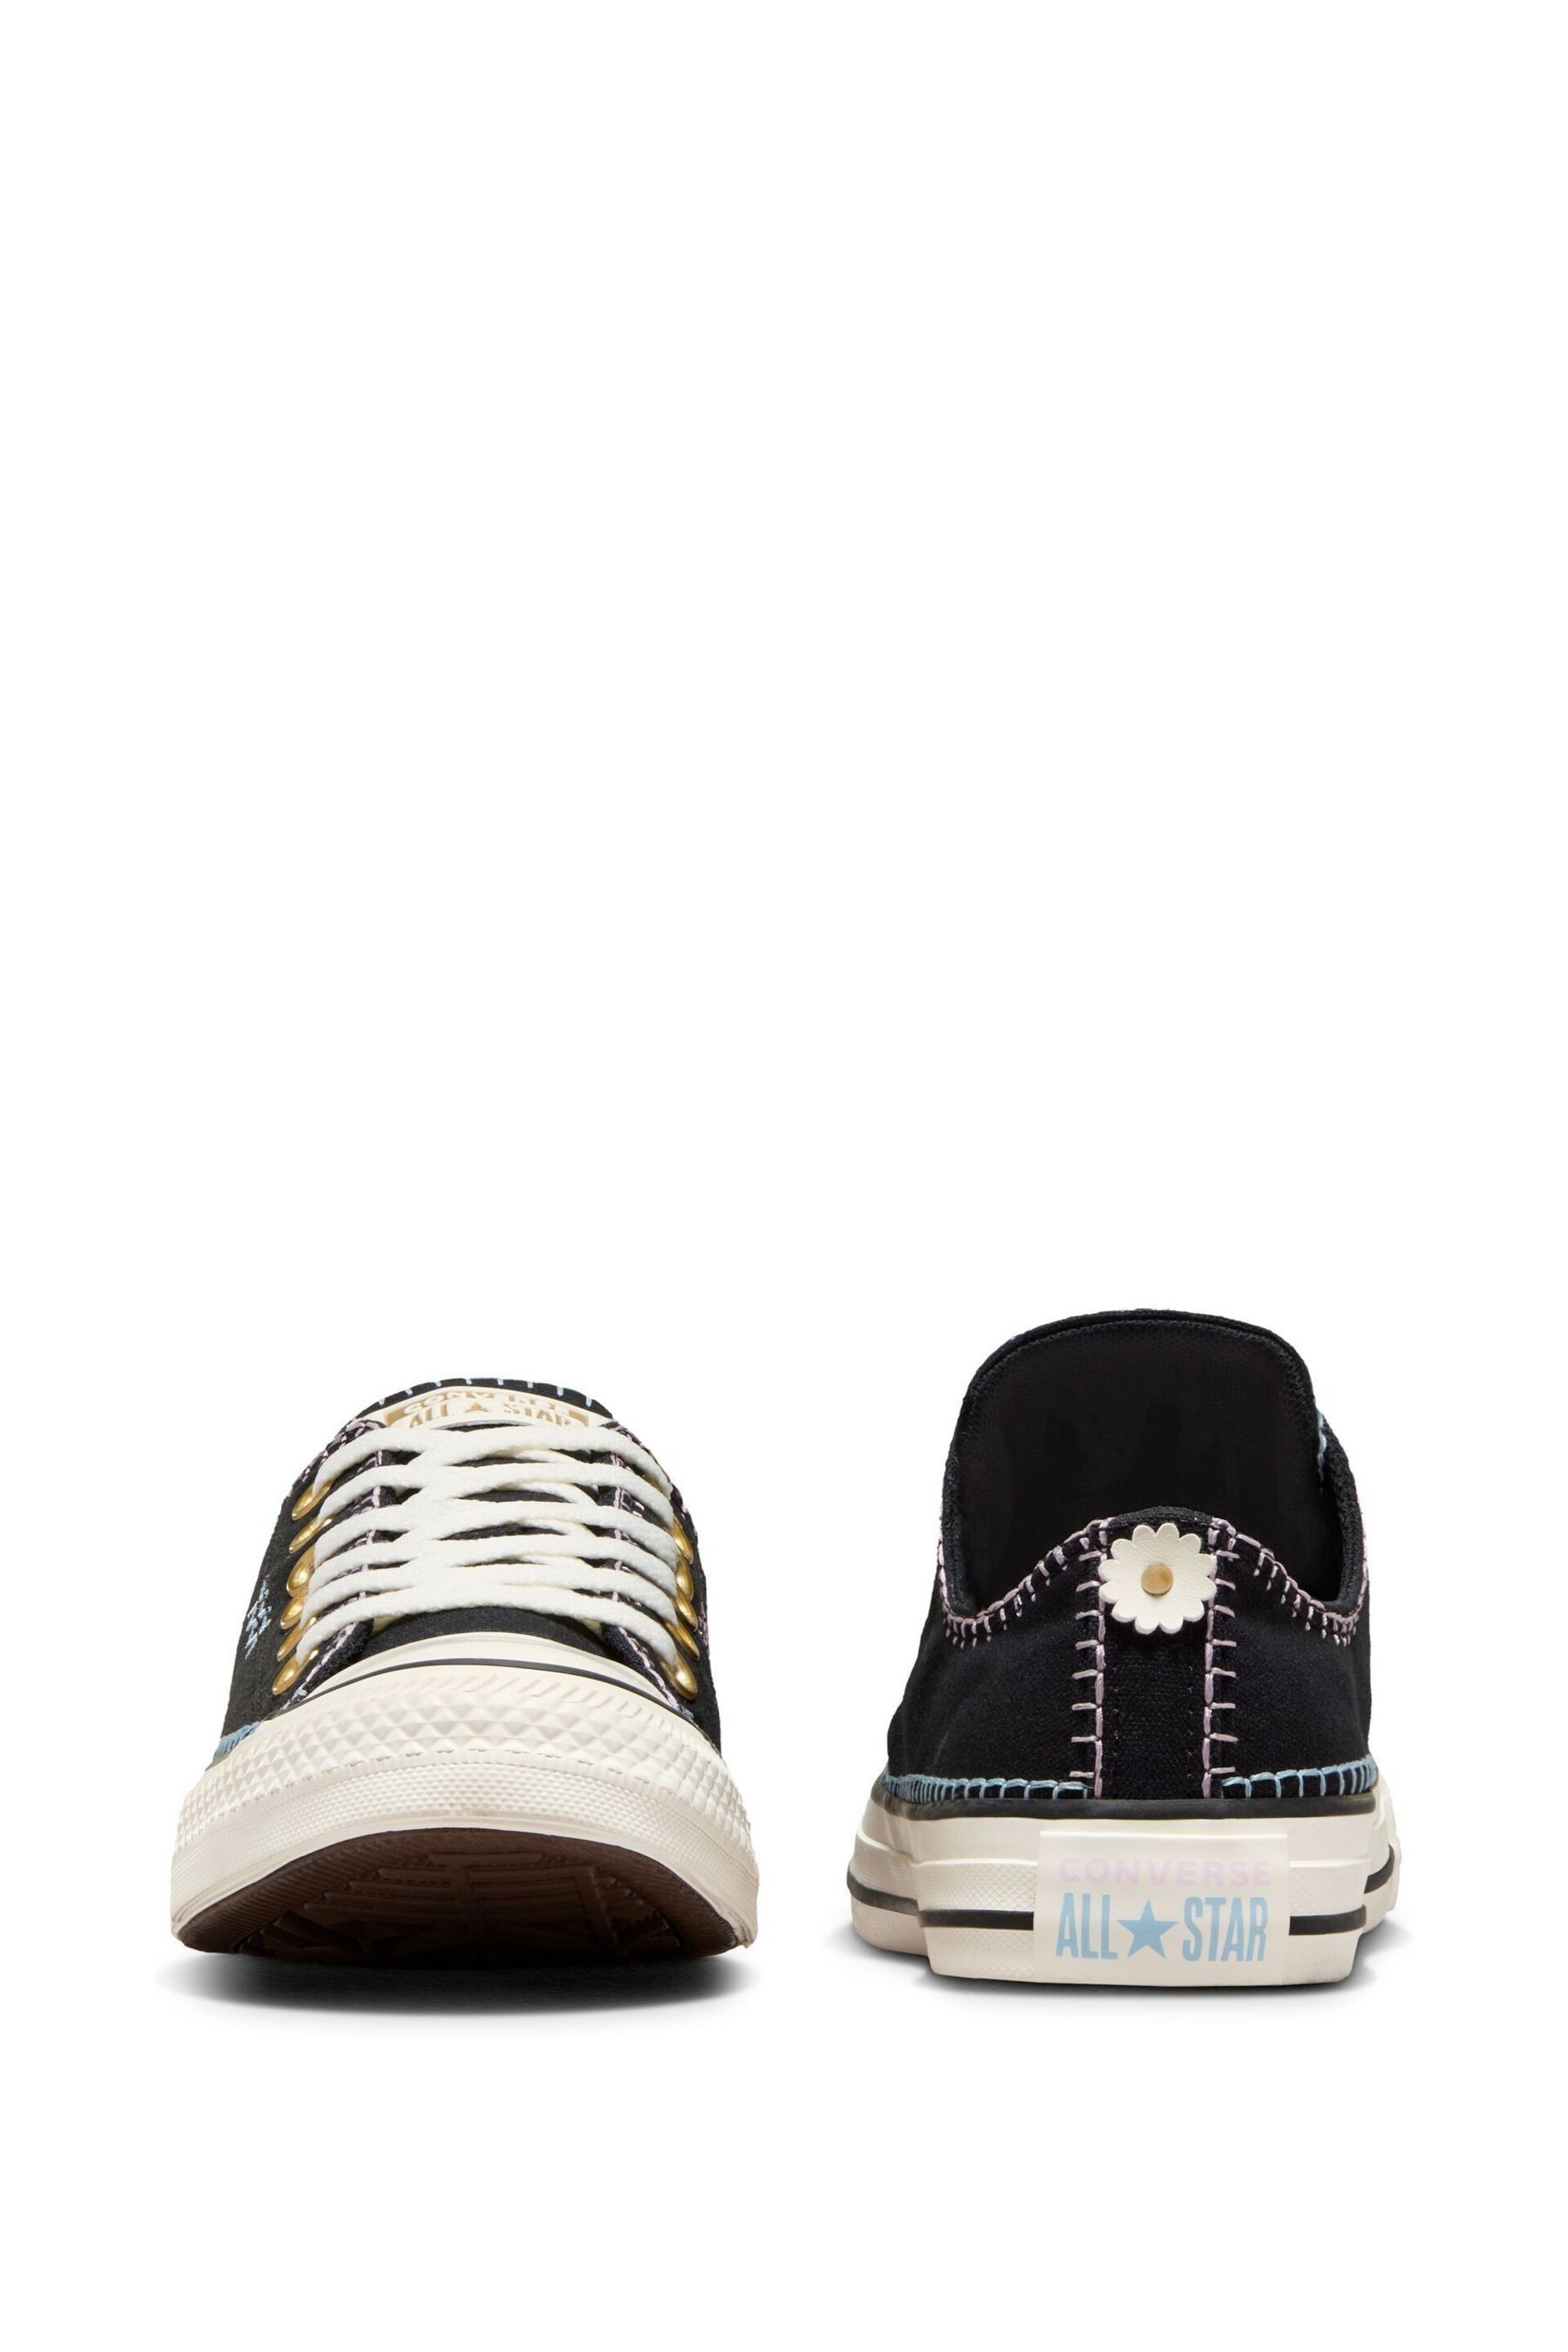 Converse Black Chuck Taylor All Star Crafted Stitching Ox Trainers - Image 7 of 10